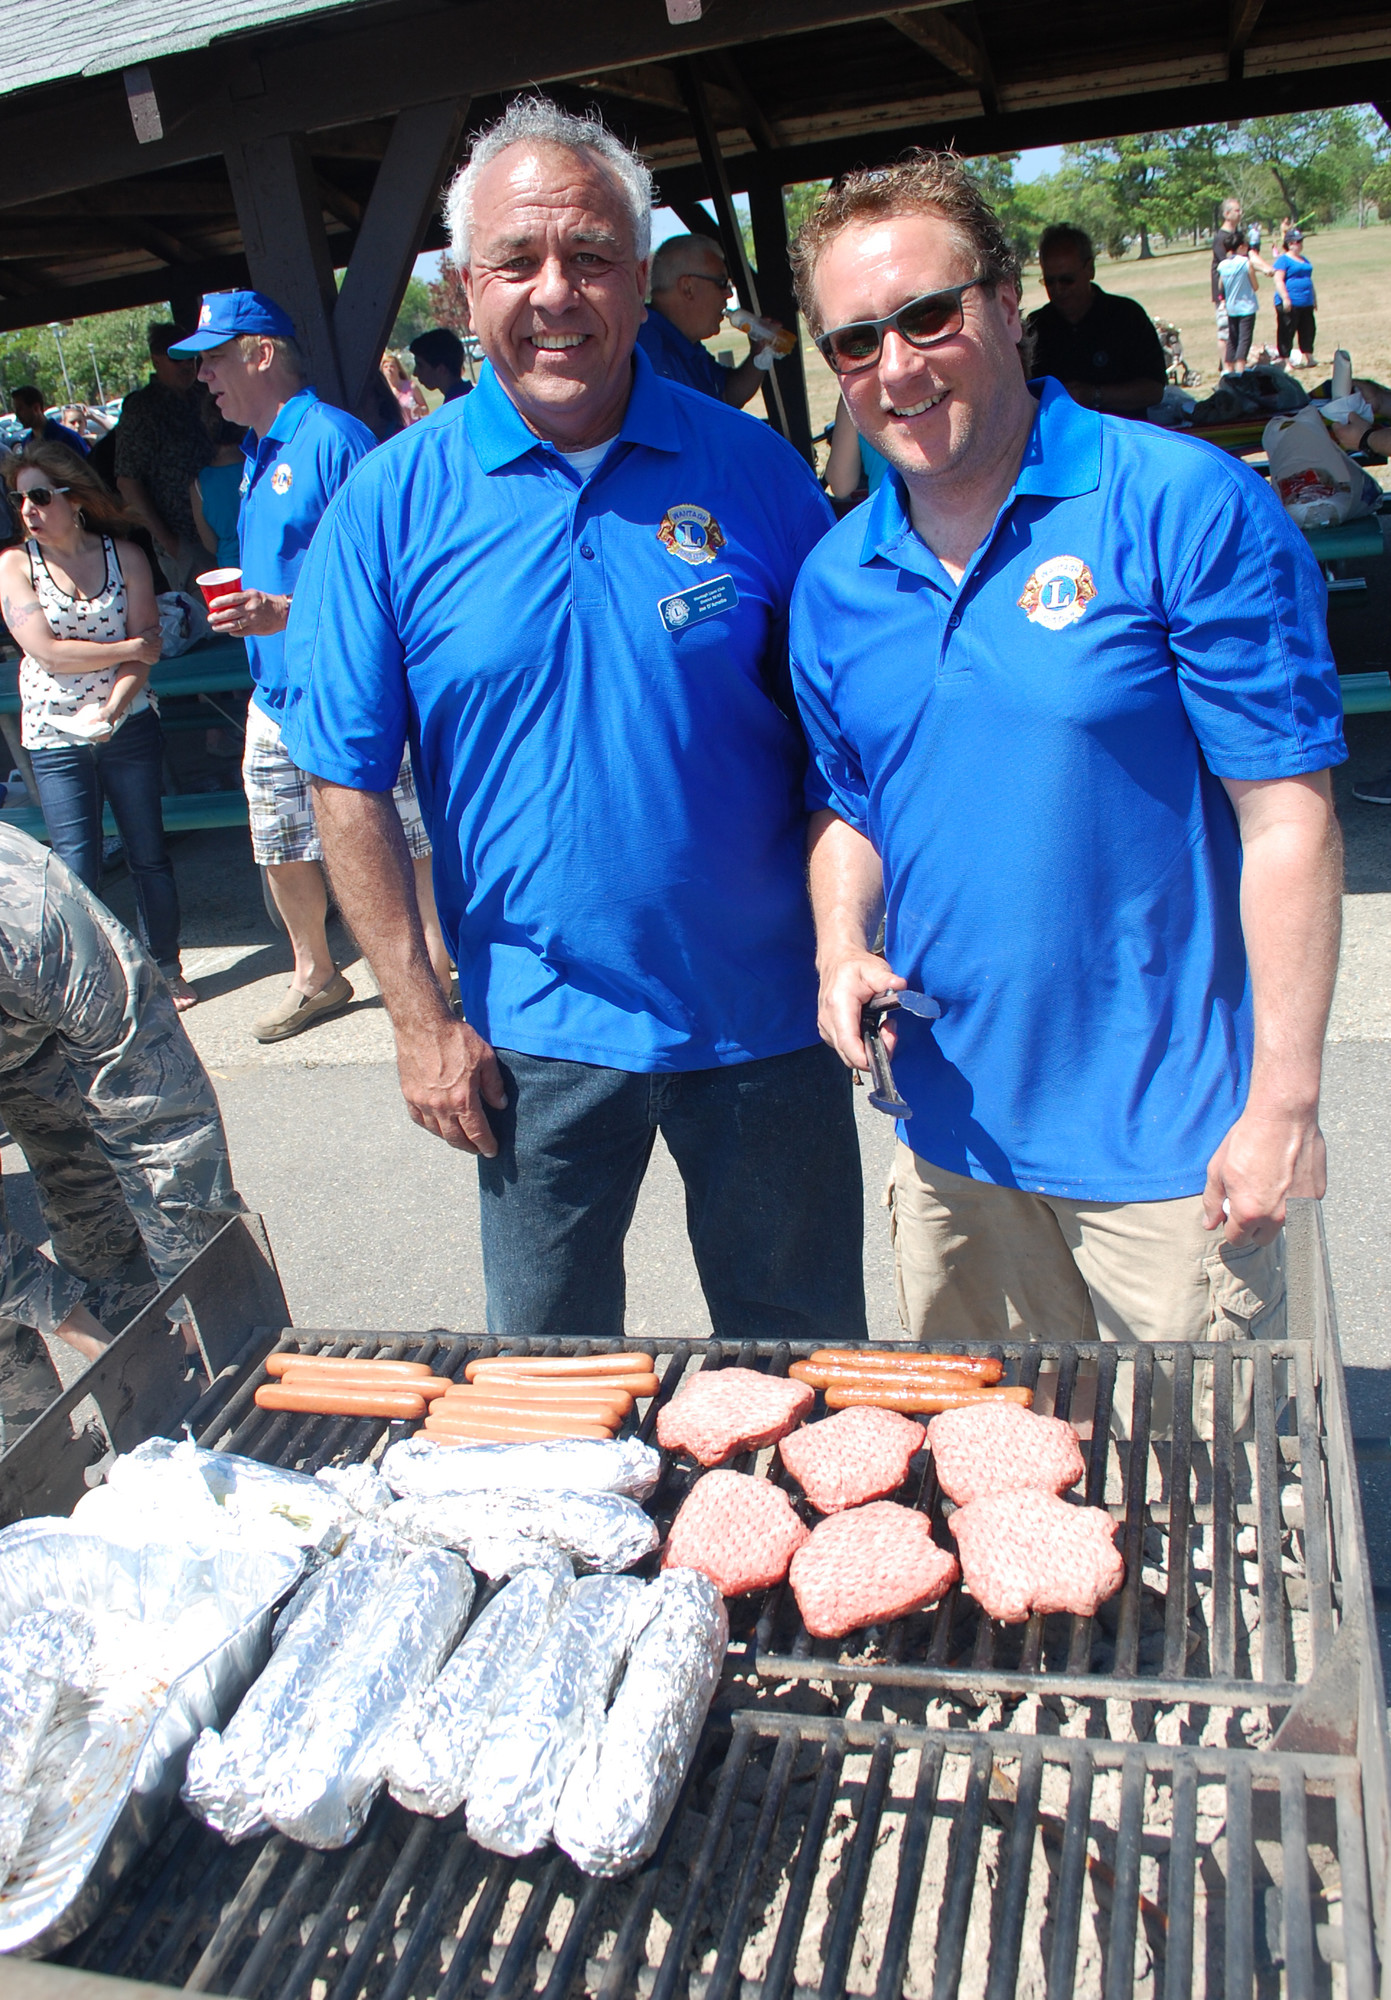 Lions Club members Joe D’Amelio, left, and Michael Motschwiller had the grill going.